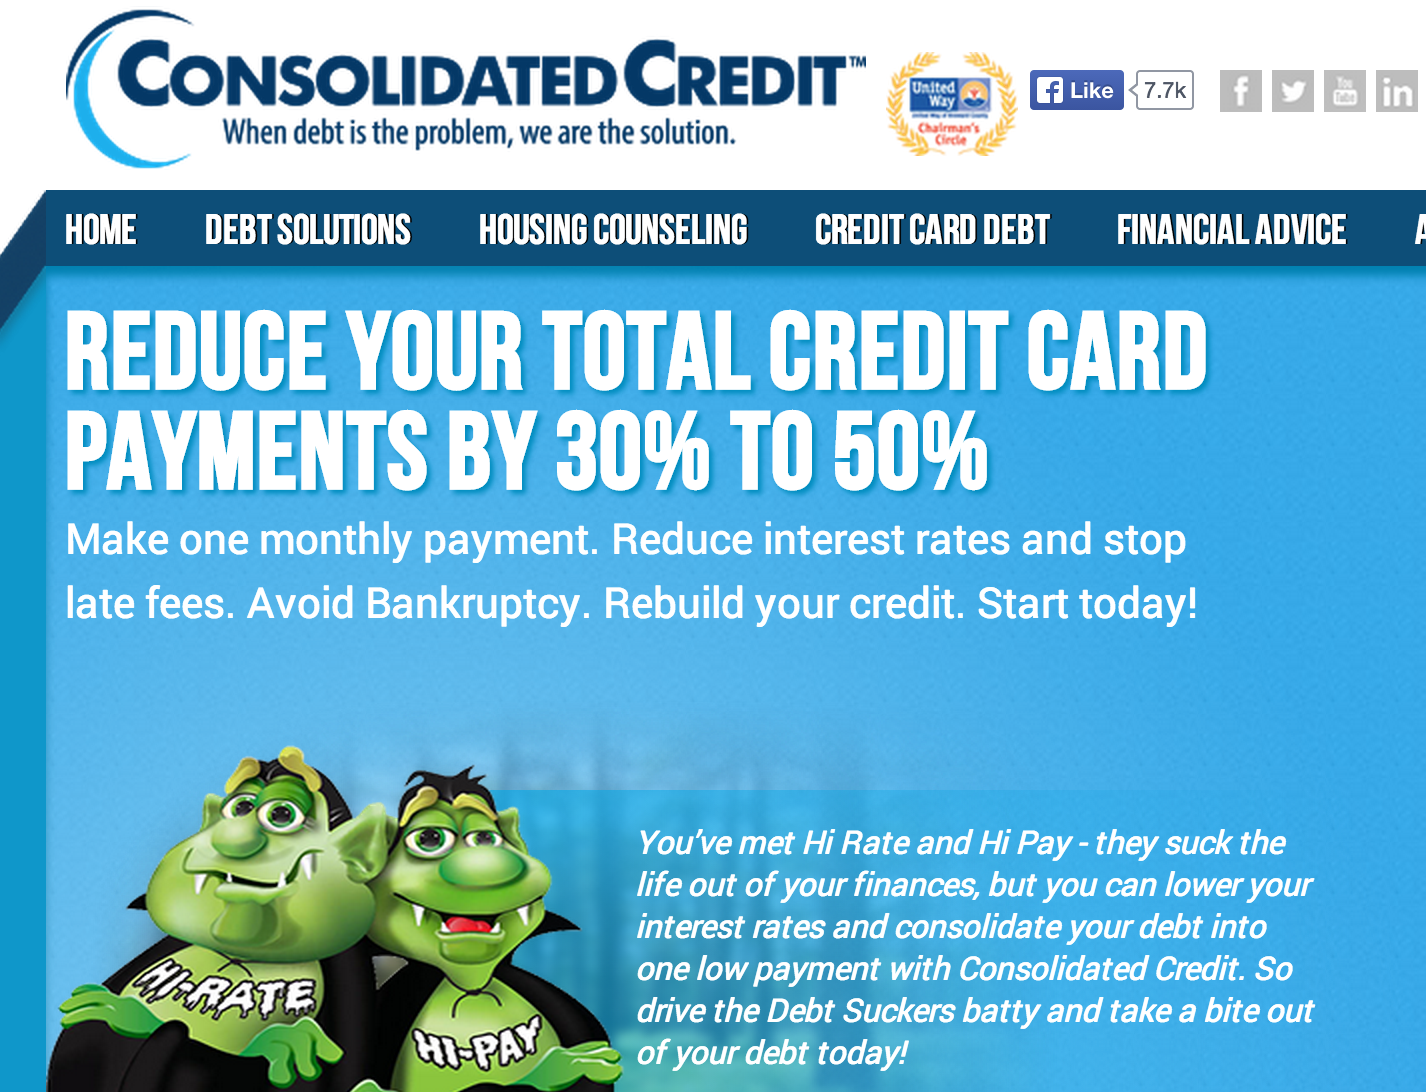 Founder Of Consolidated Credit Counseling Services Reportedly Tied To Payday Lenders